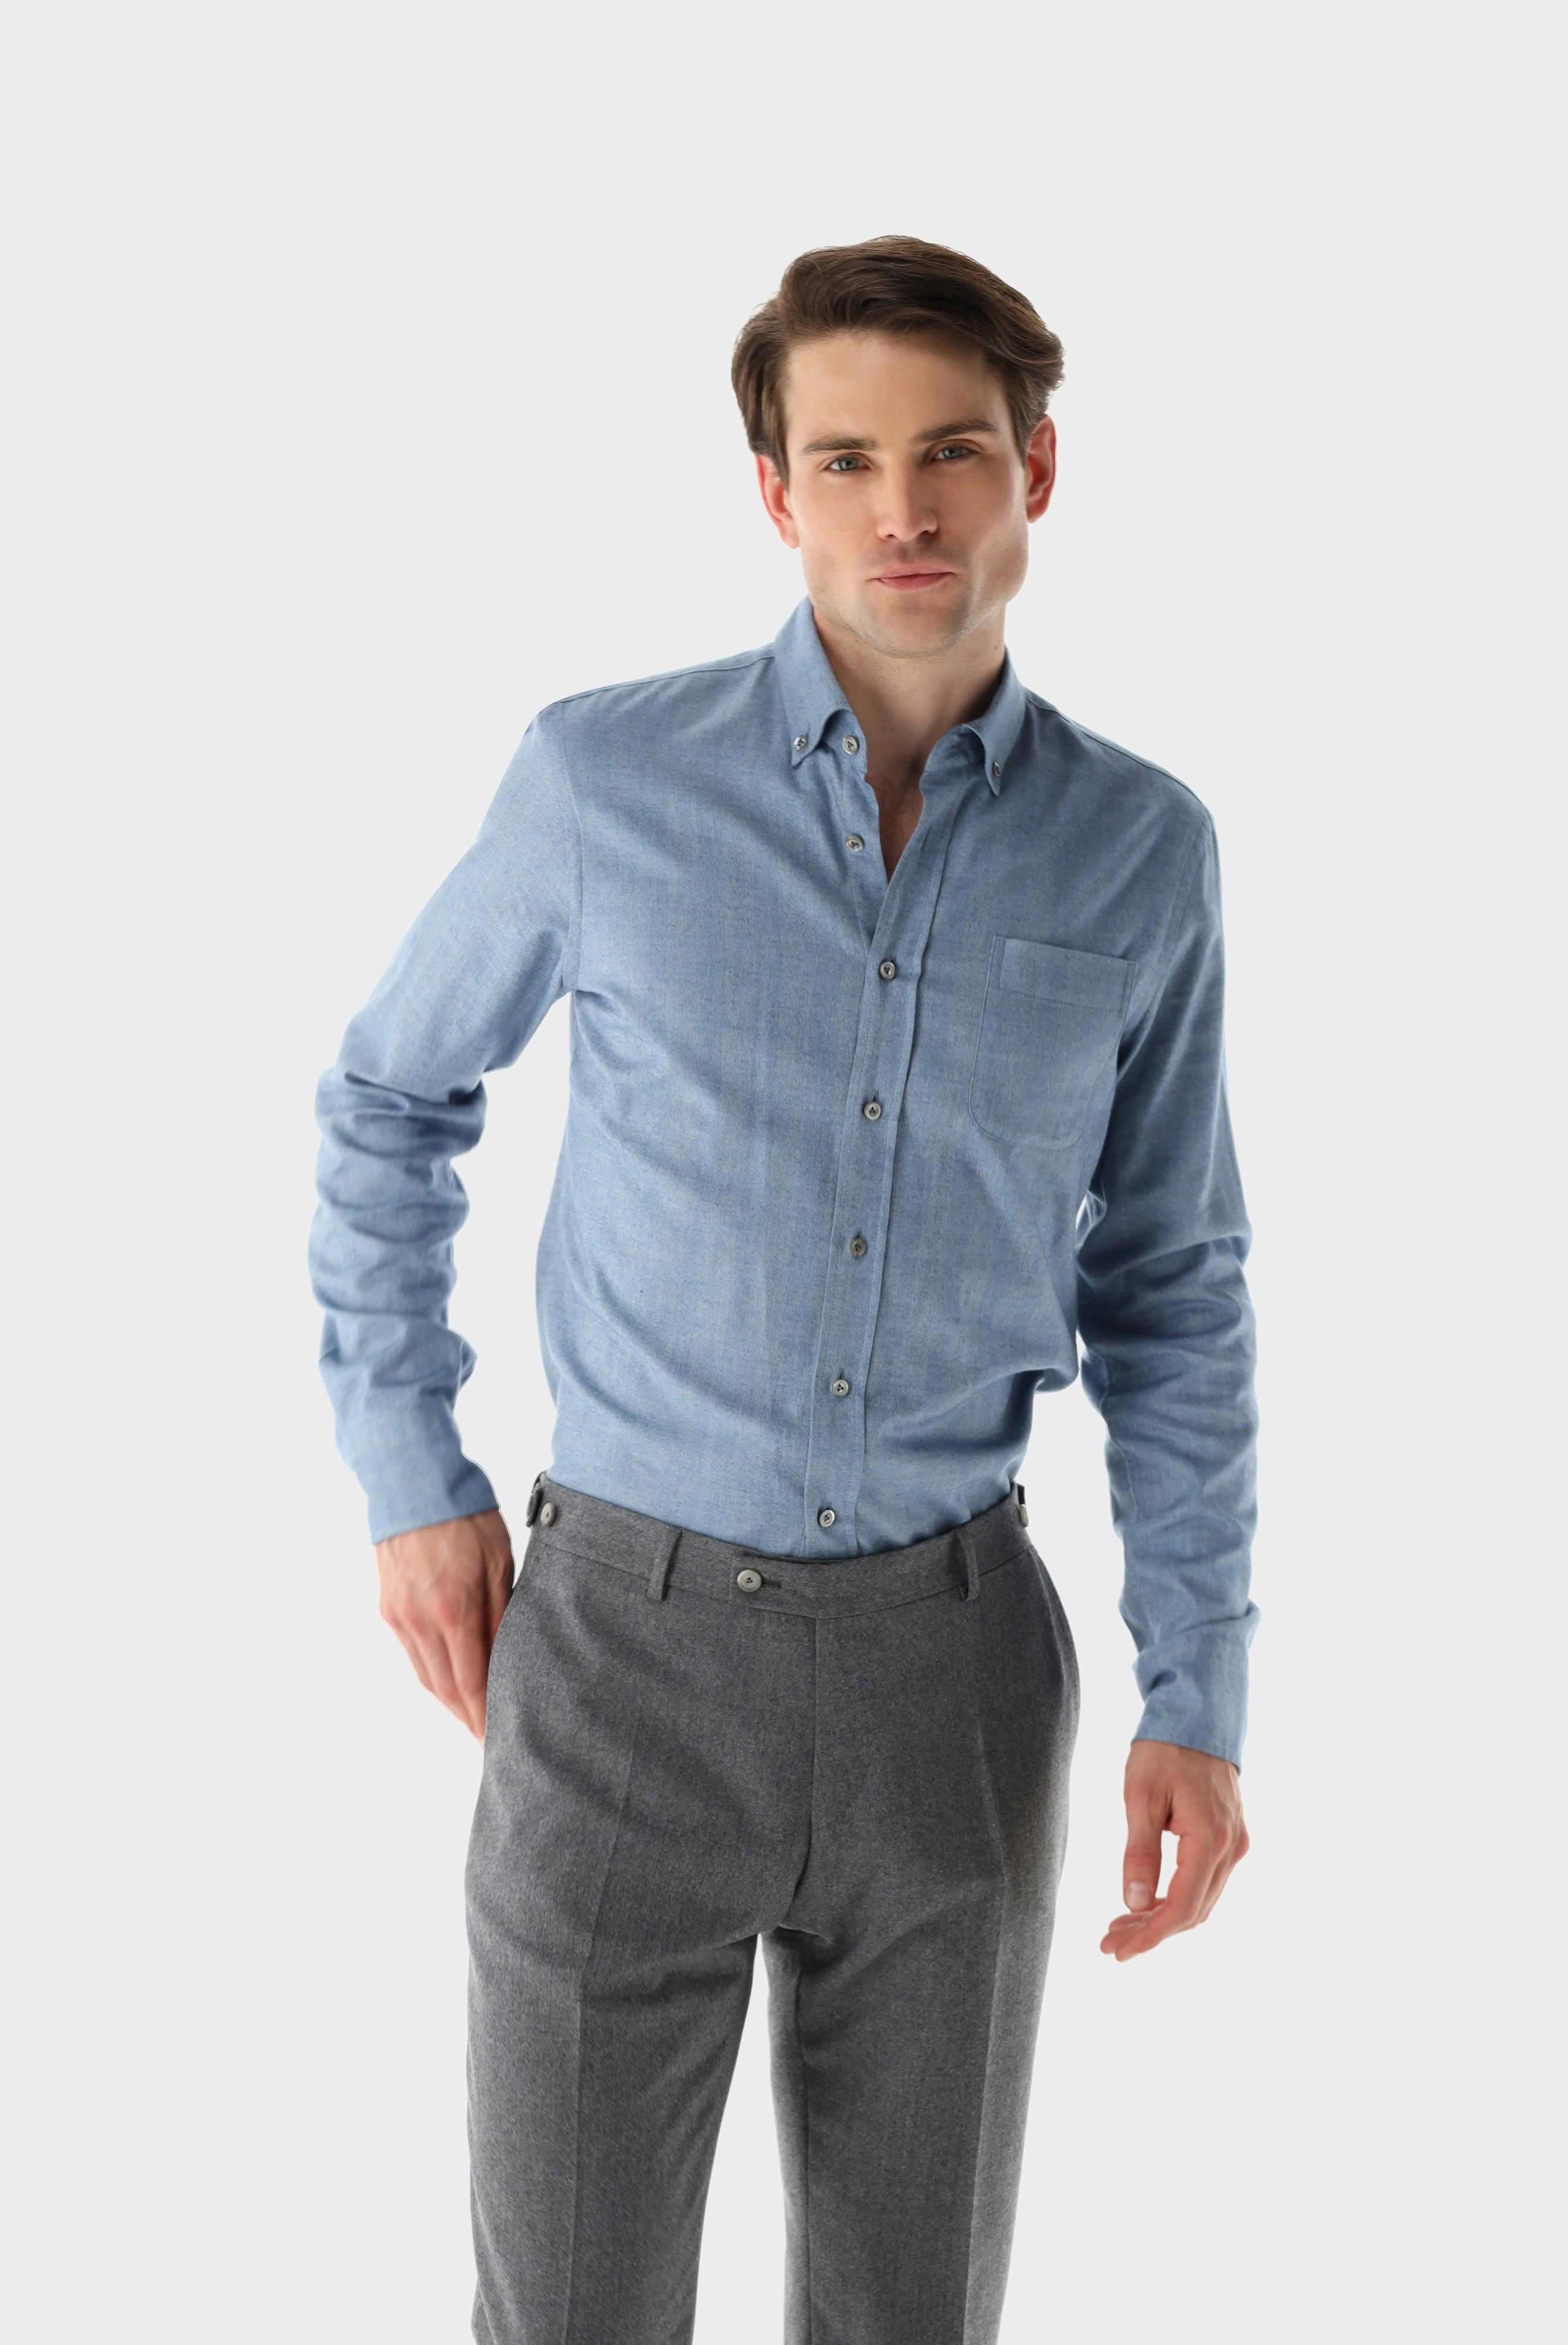 Casual Hemden+Button-Down Flanellhemd Tailor Fit+20.2013.9V.155045.770.43